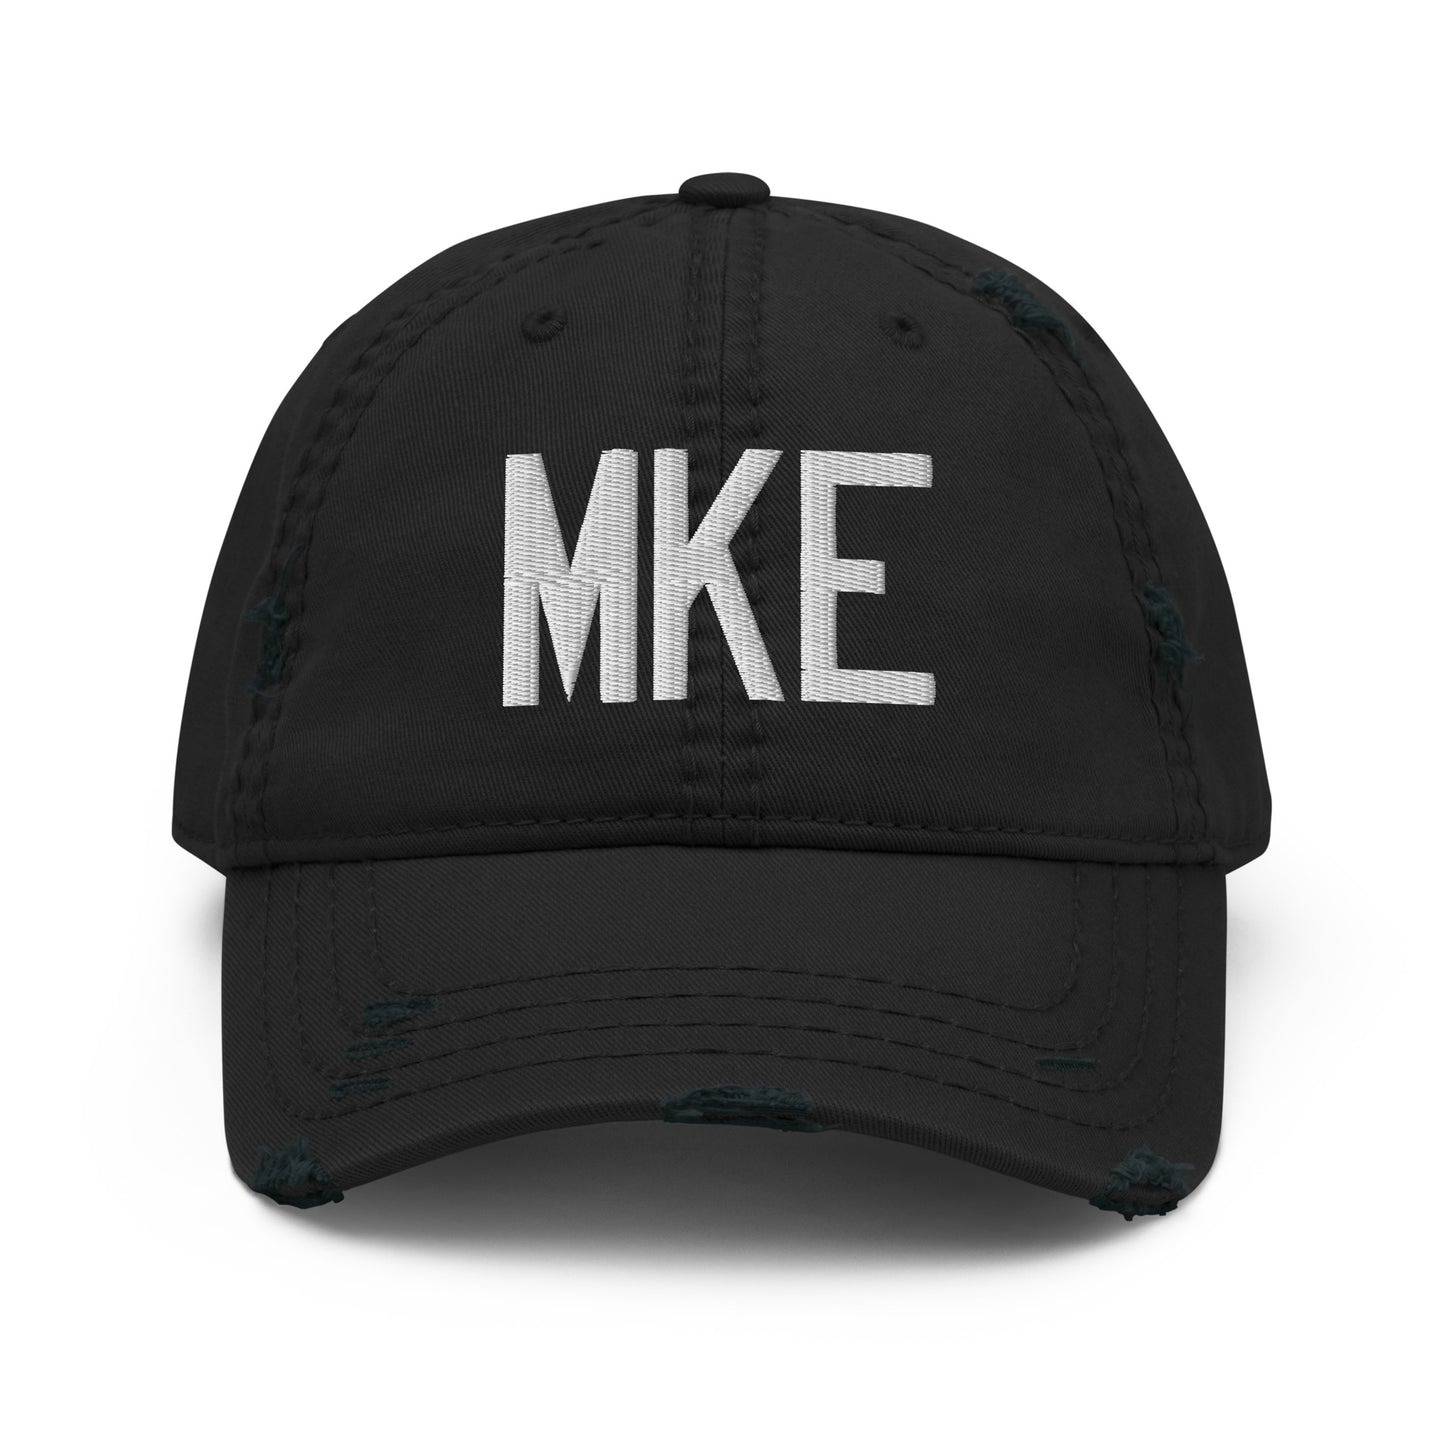 Airport Code Distressed Hat - White • MKE Milwaukee • YHM Designs - Image 10